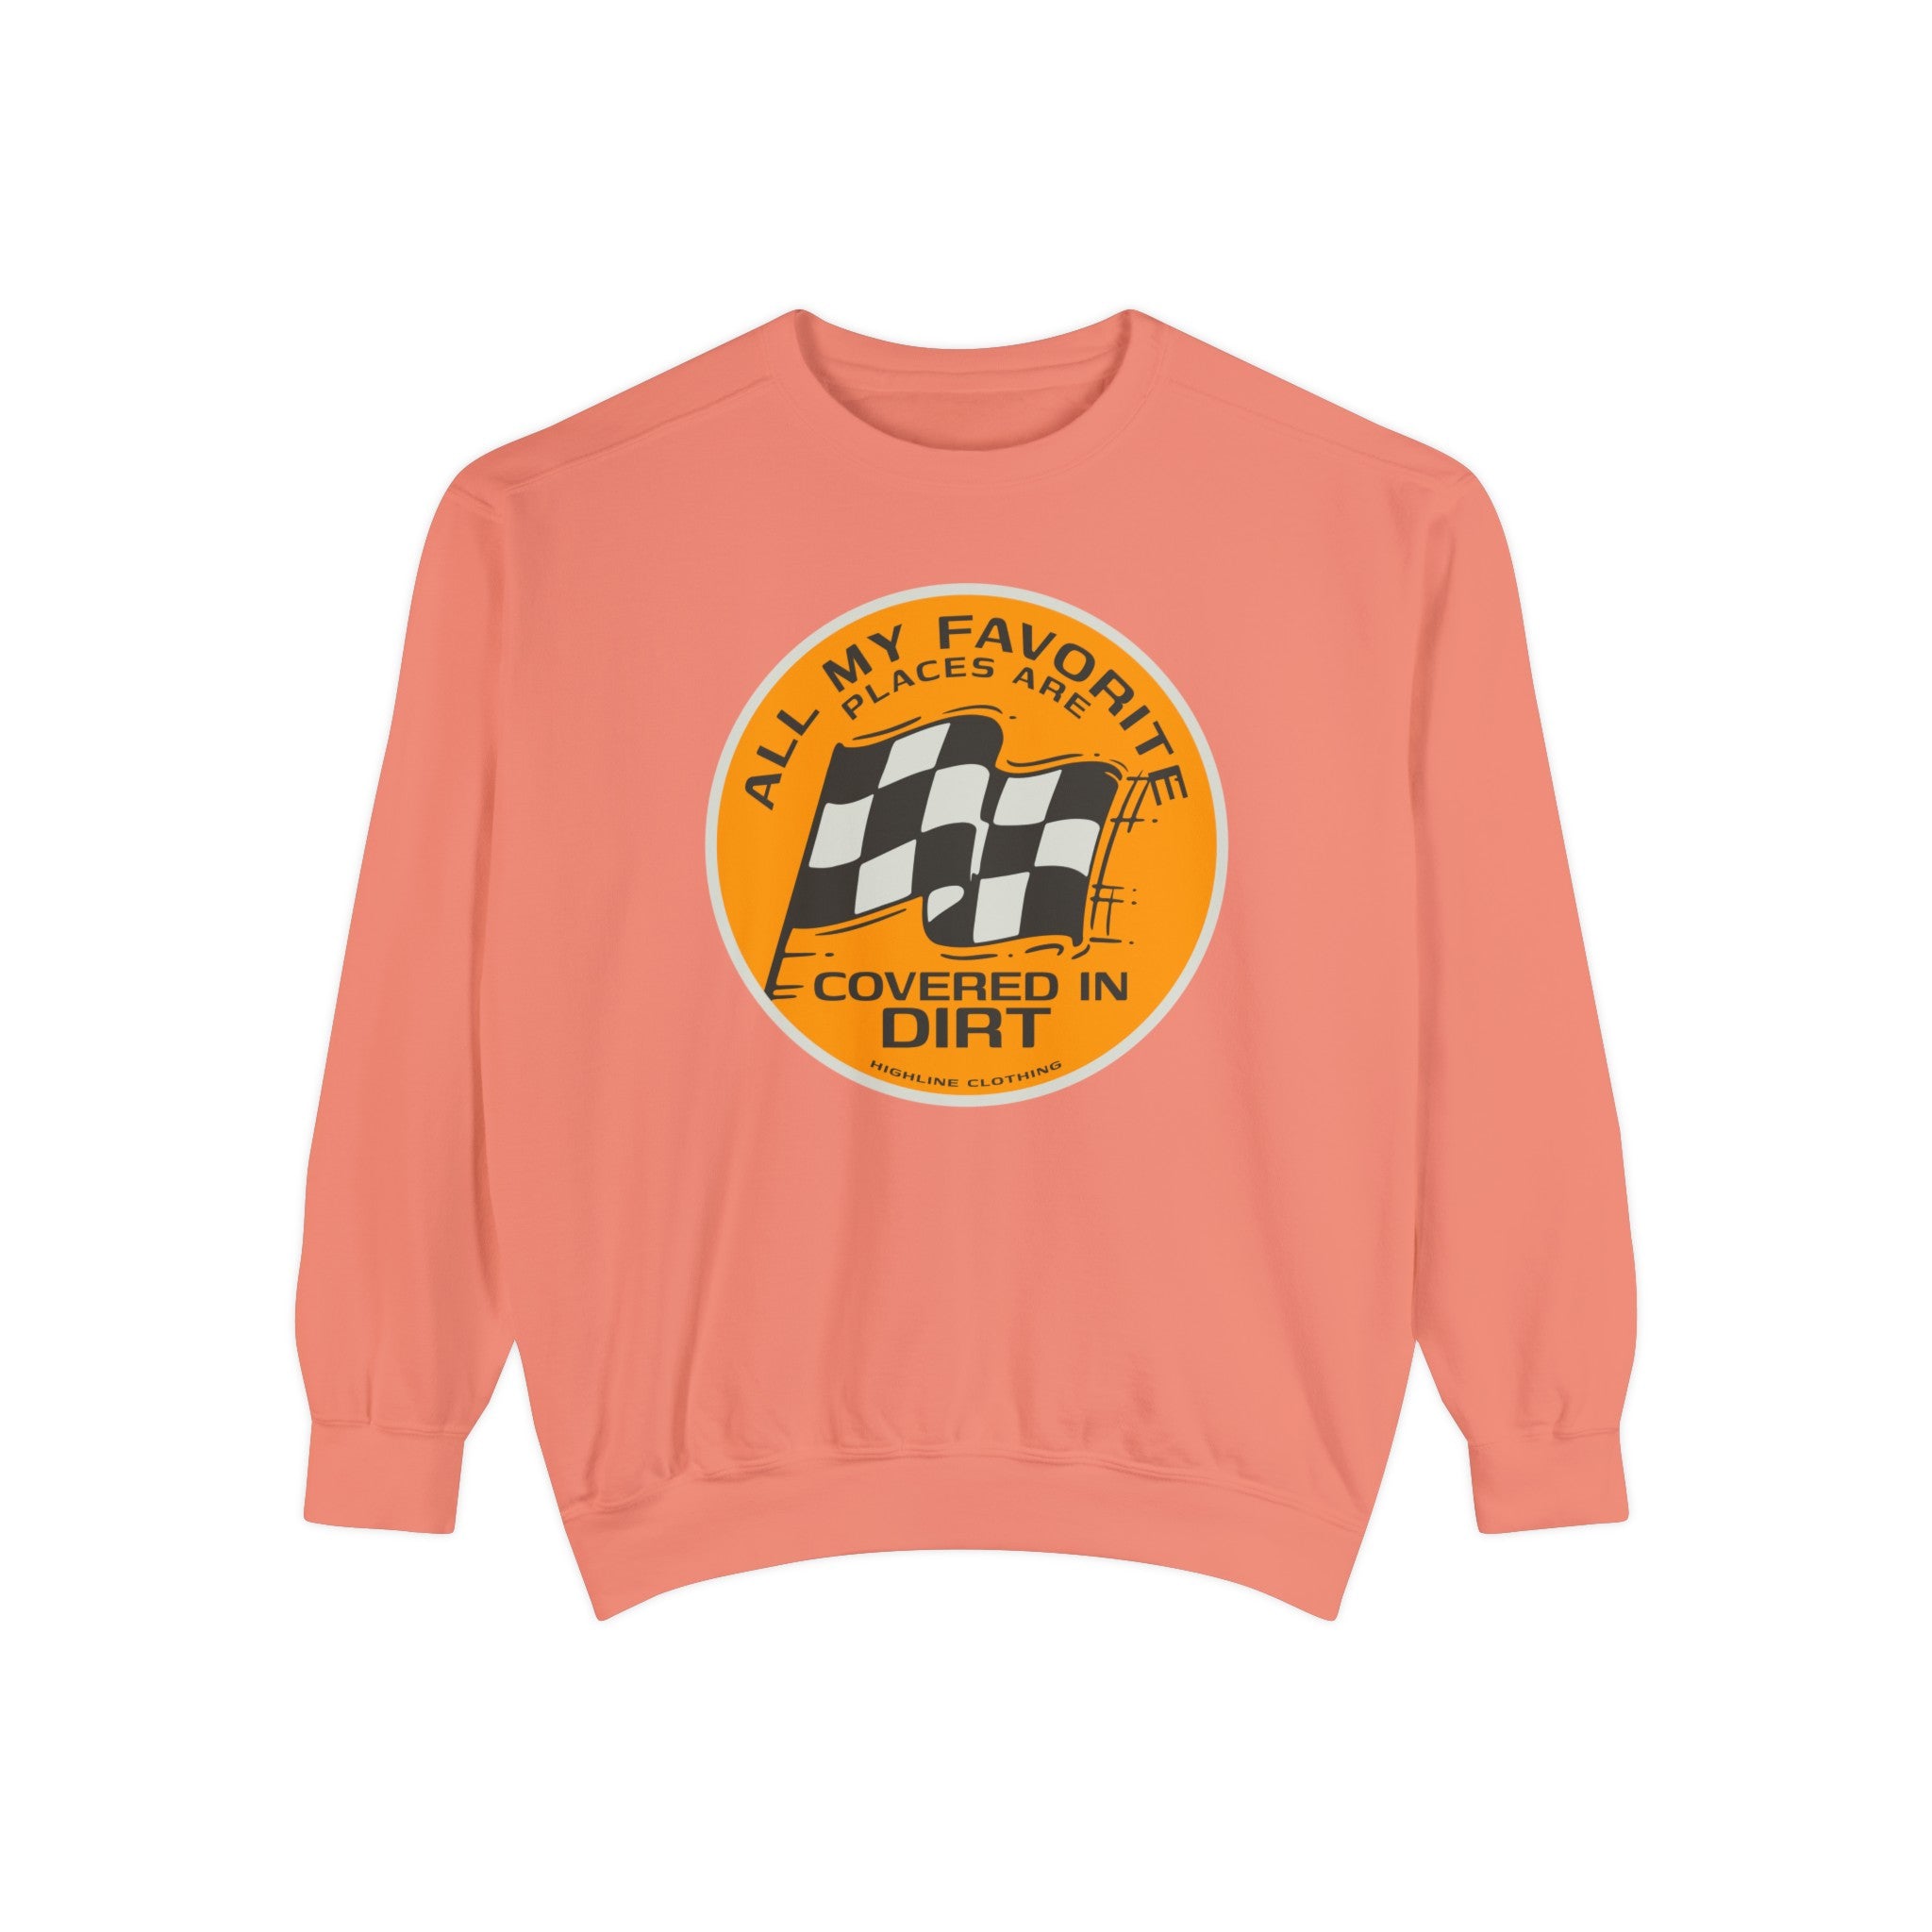 All My Favorite Places are Covered in Dirt Unisex Garment-Dyed Sweatshirt